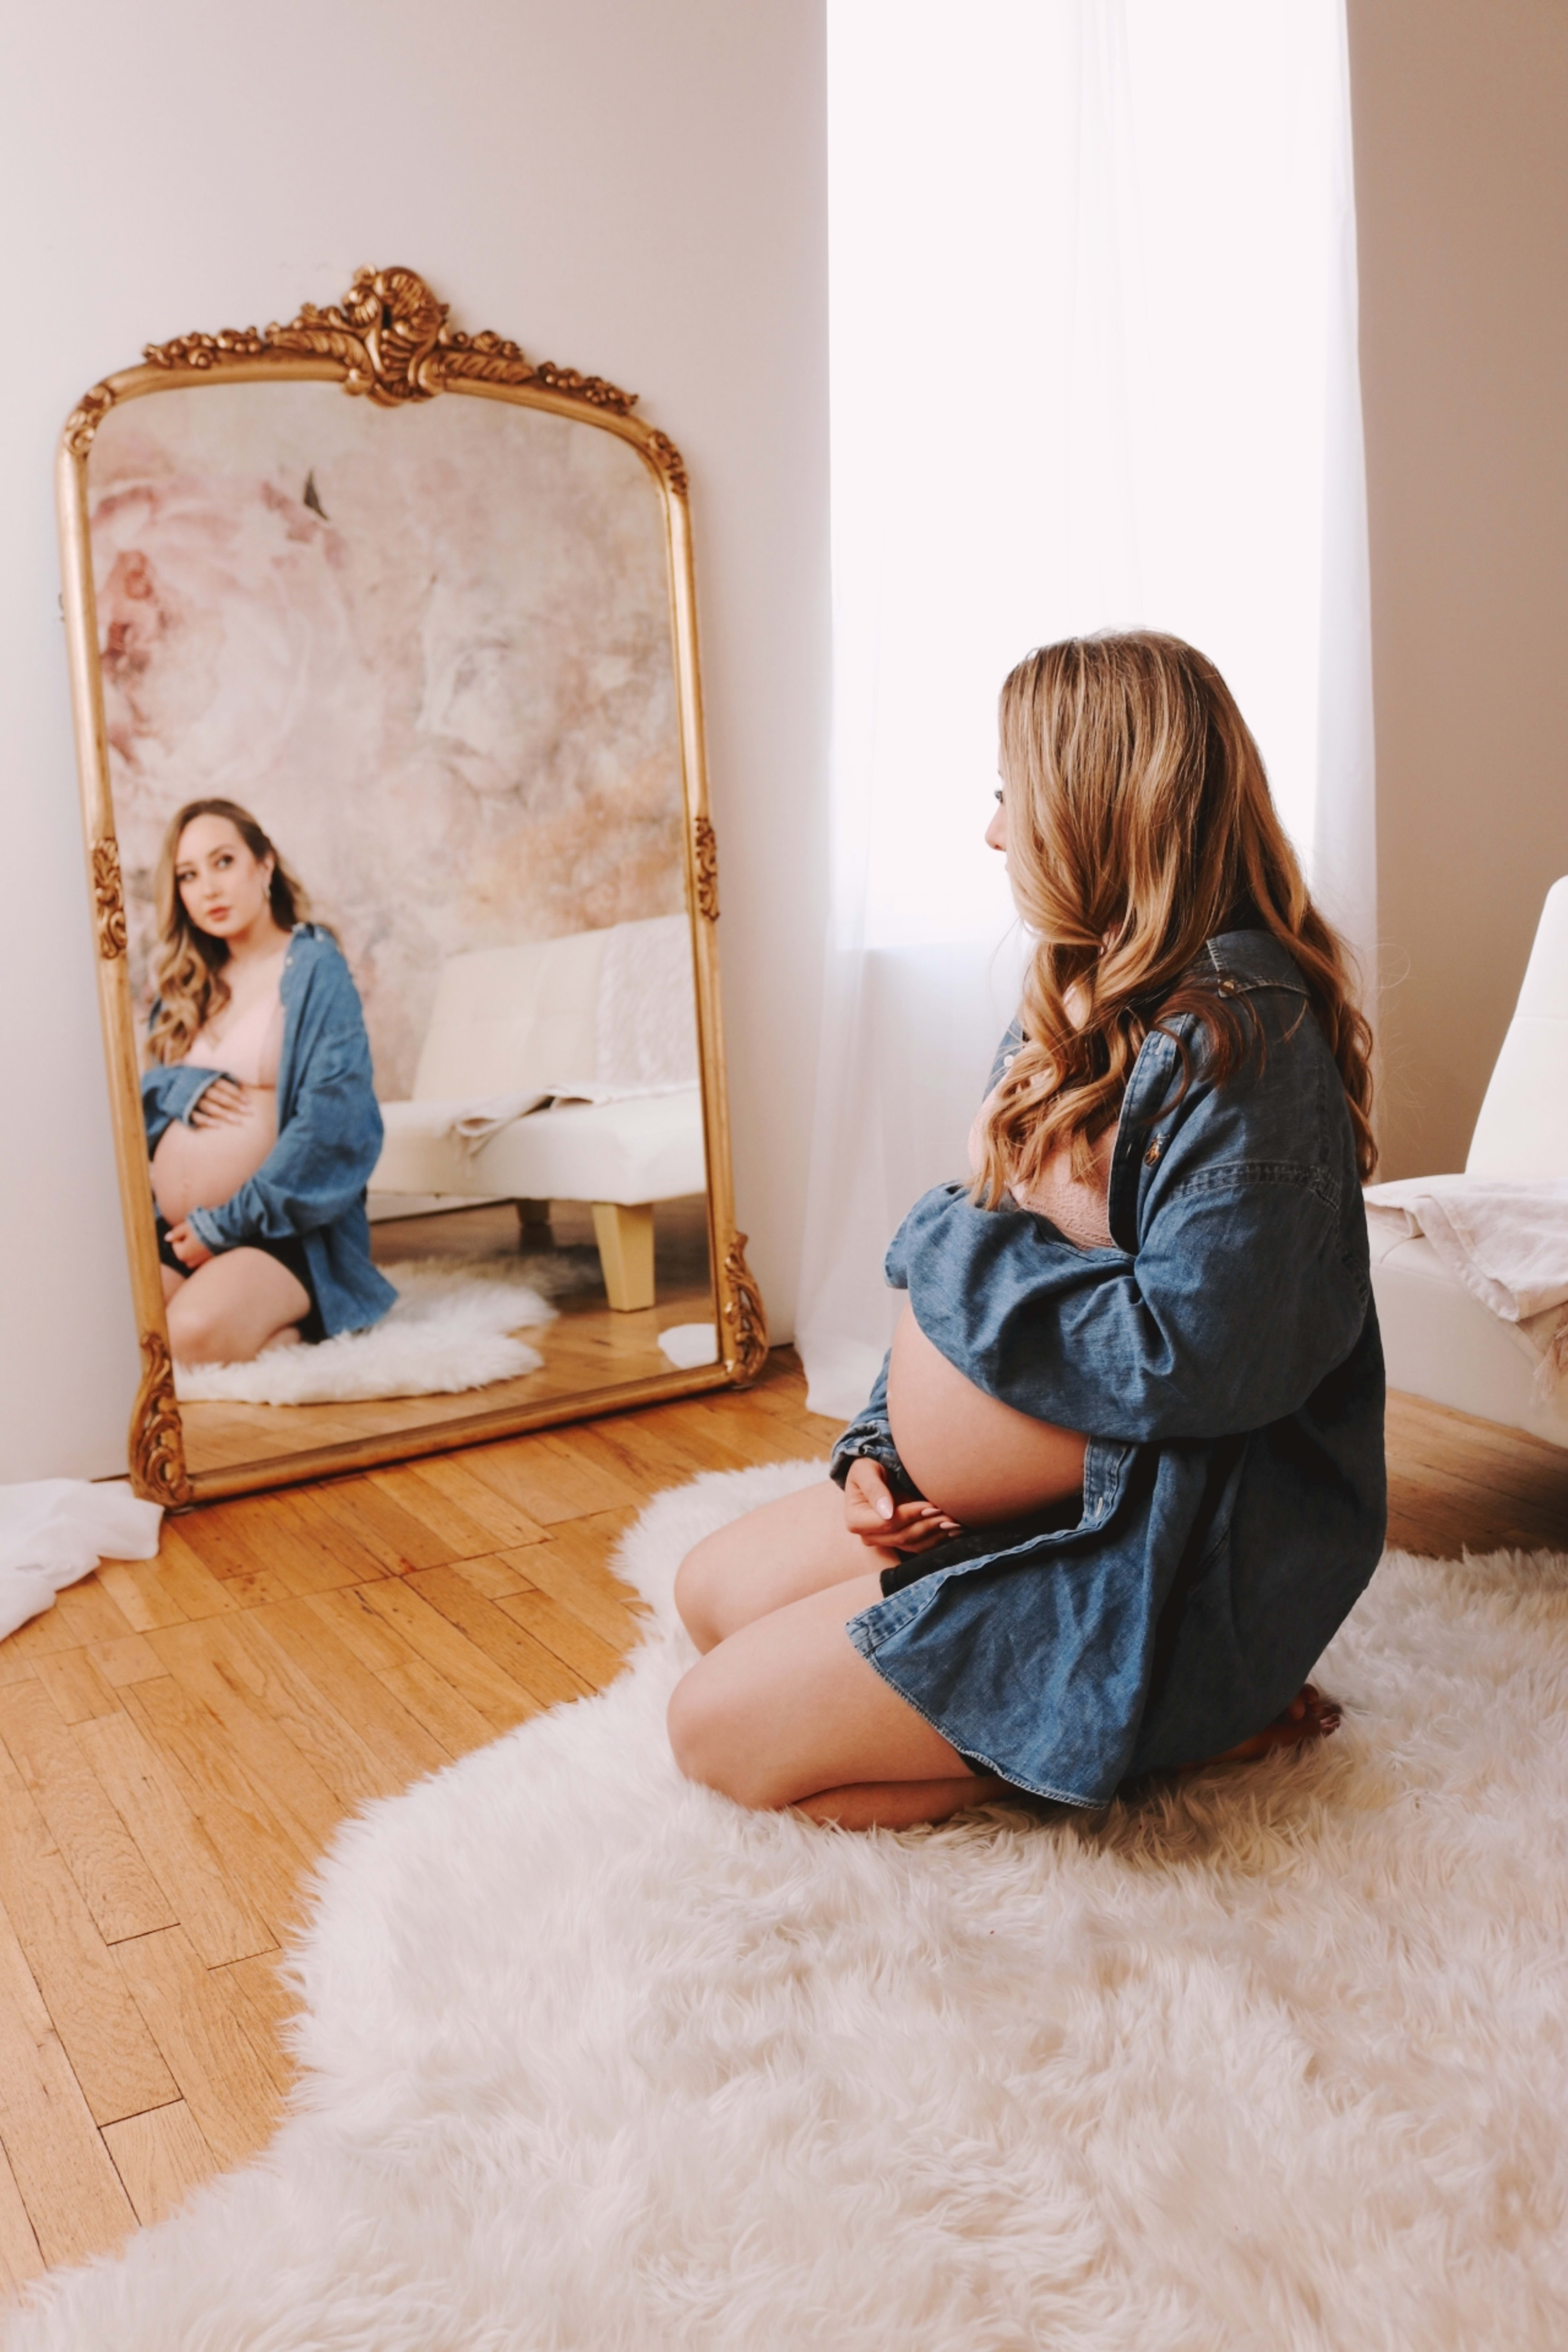 A pregnant woman sitting on white floor for a maternity photoshoot in front of a mirror.